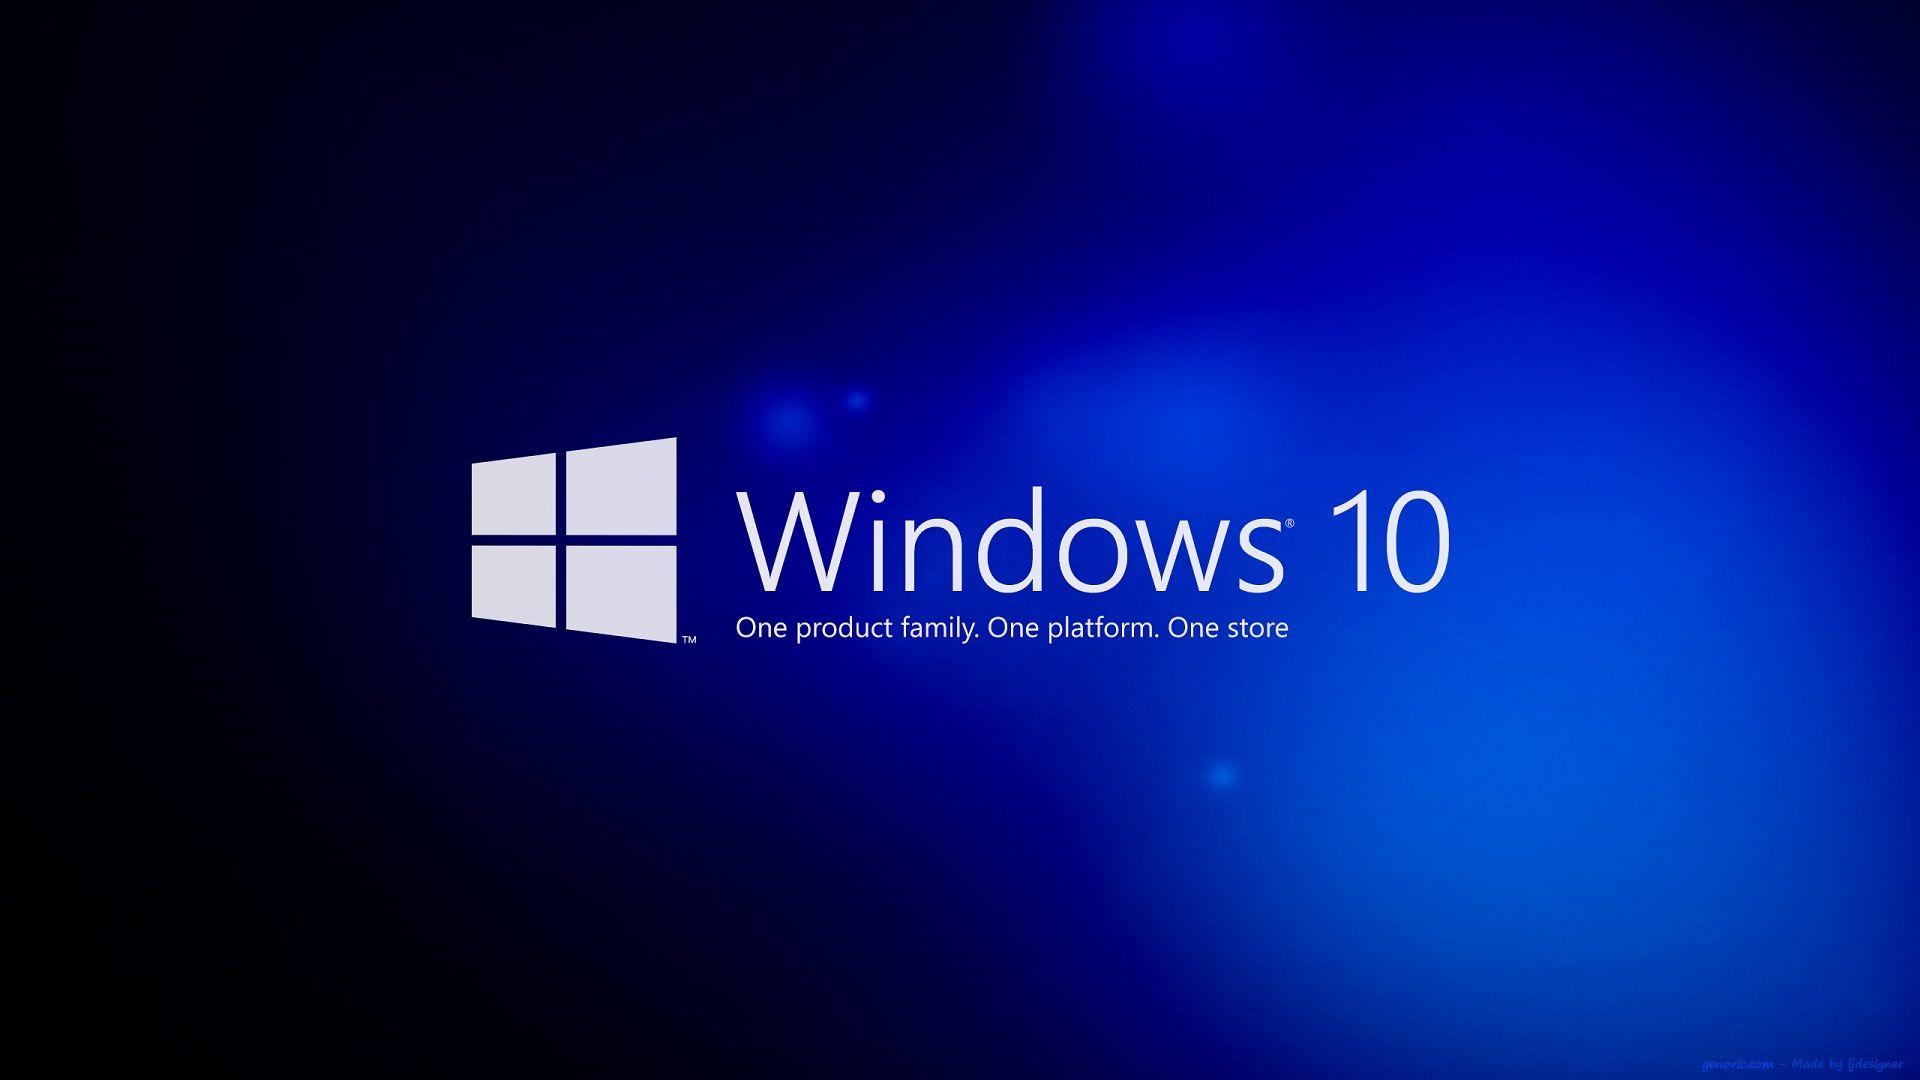 Windows 10 Wallpapers Free Download